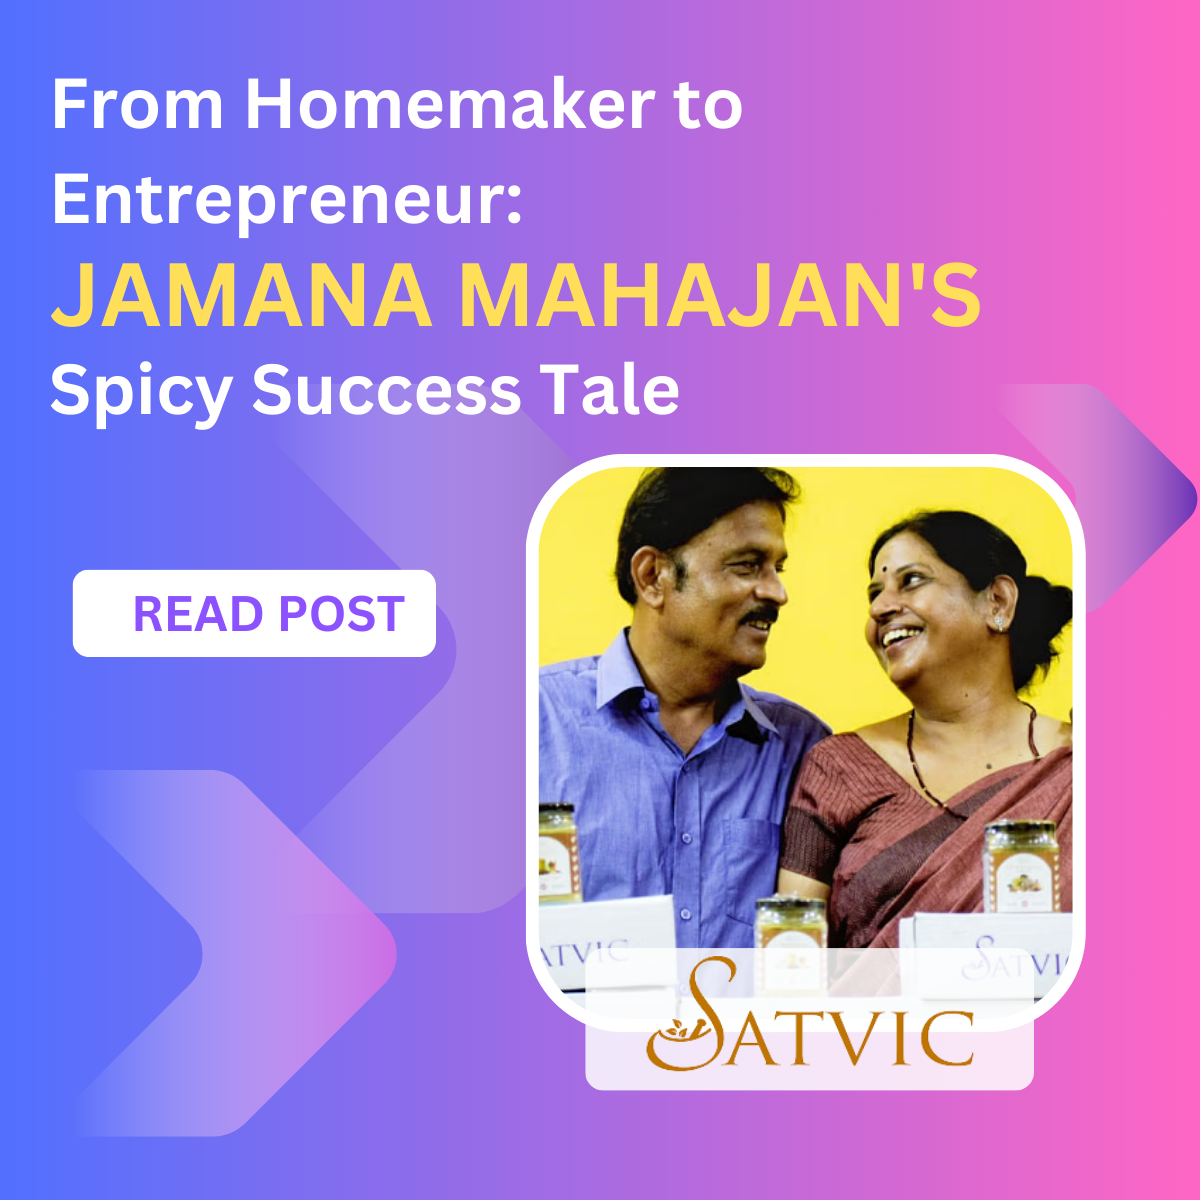 From Homemaker to Entrepreneur Spicy Success Tales